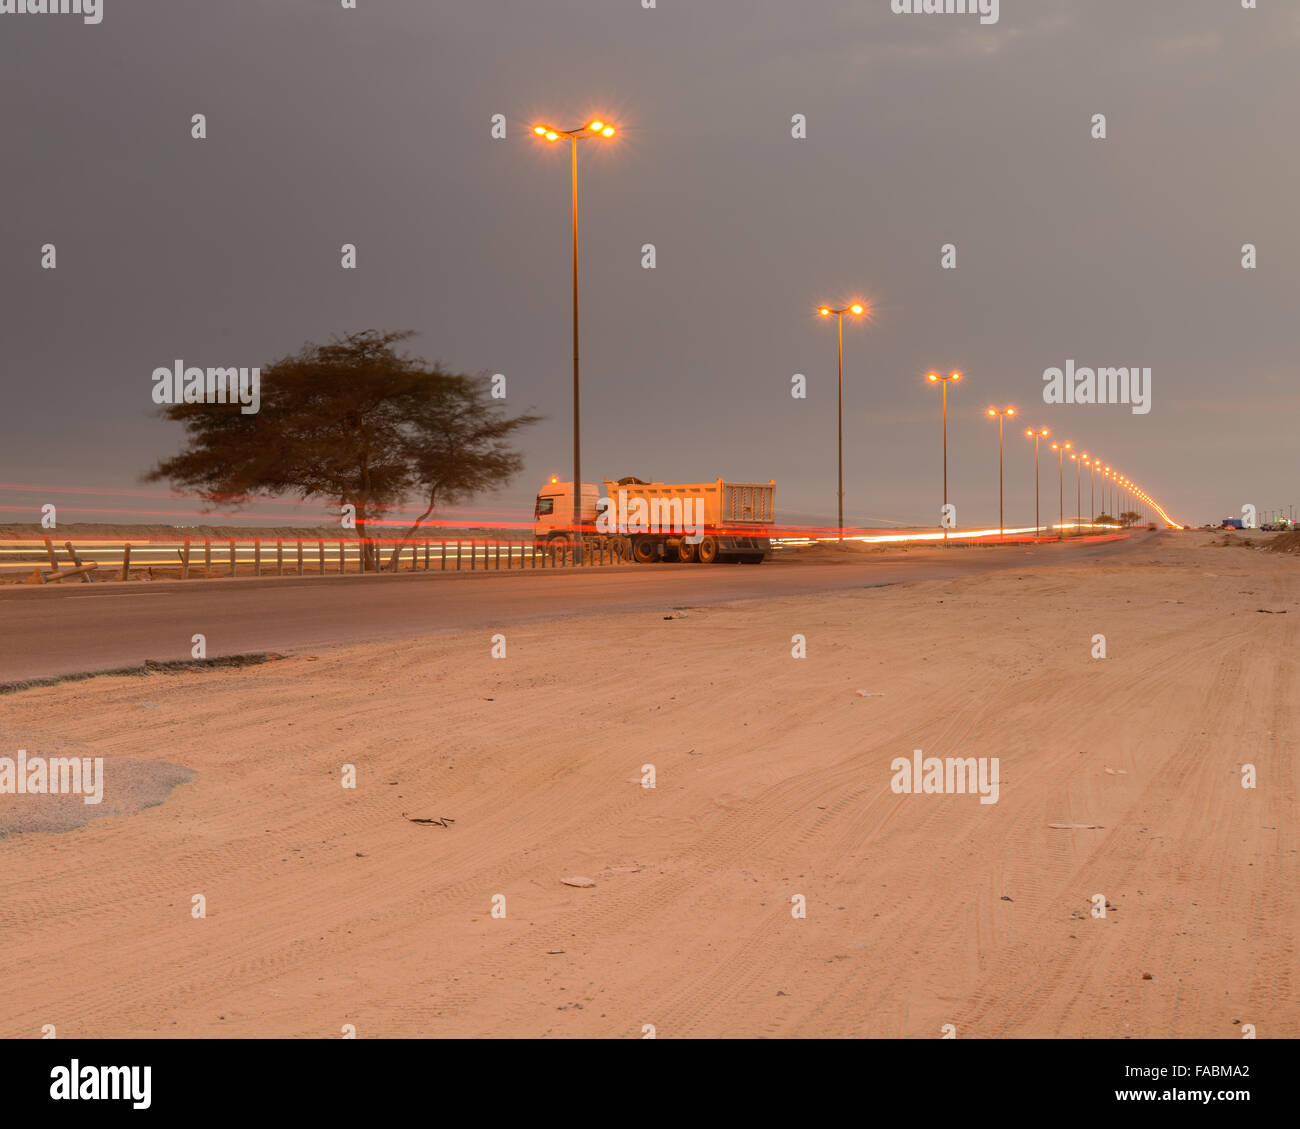 Truck waiting to do a u-turn on the Wafra road at night, Kuwait Stock Photo